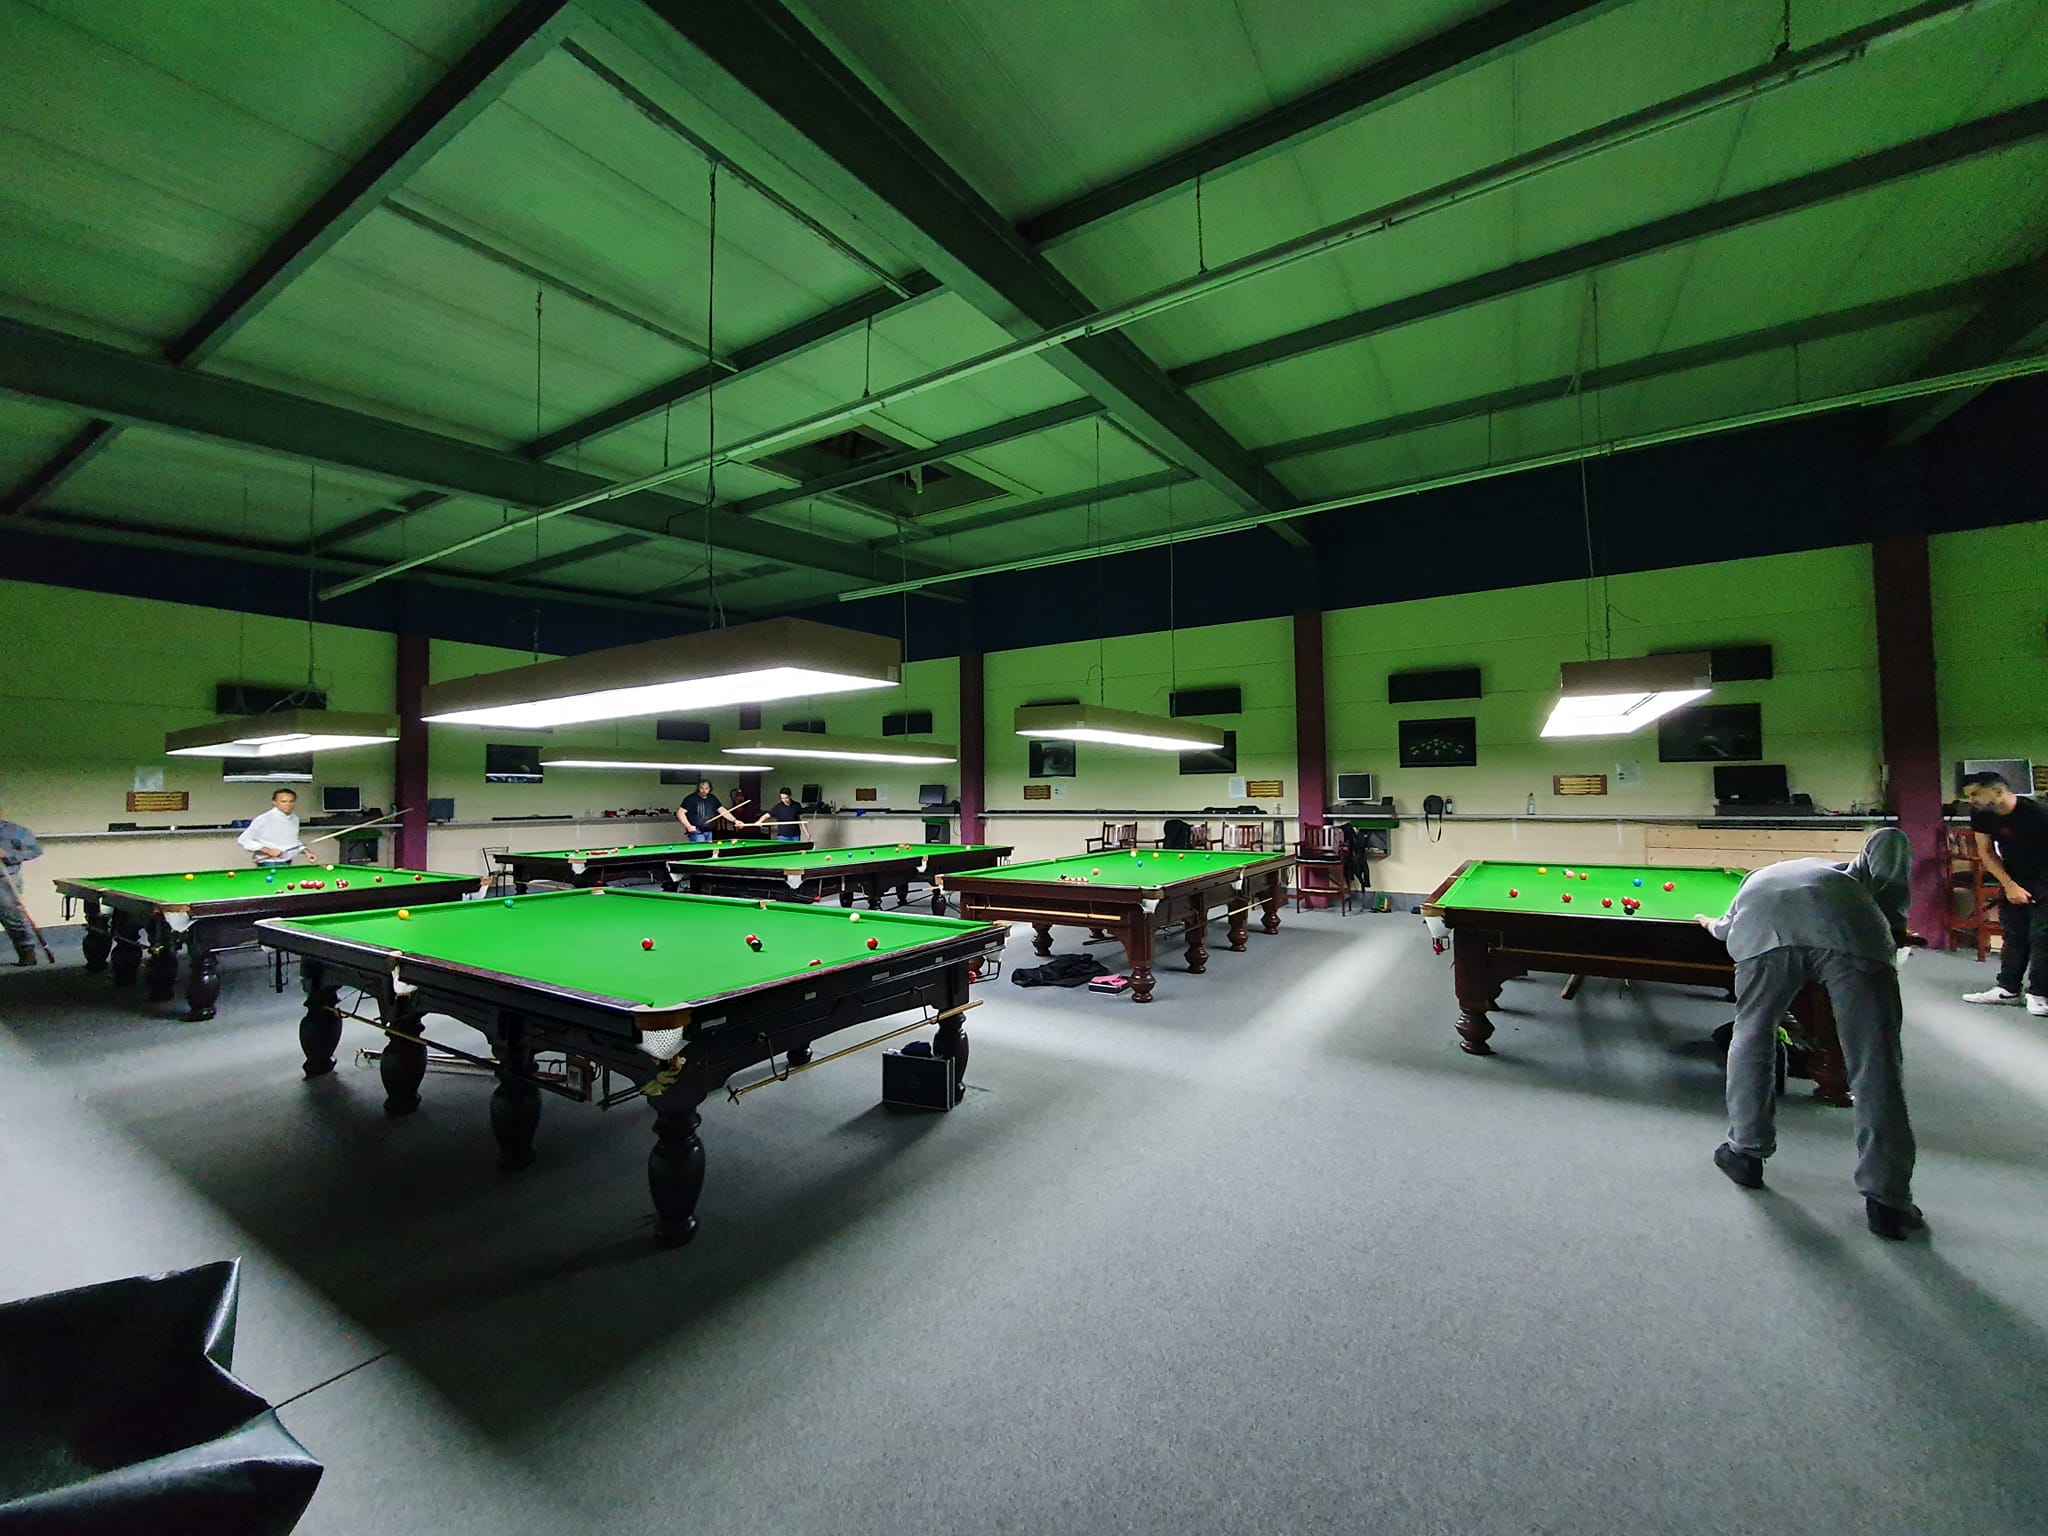 People playing snooker on six tables